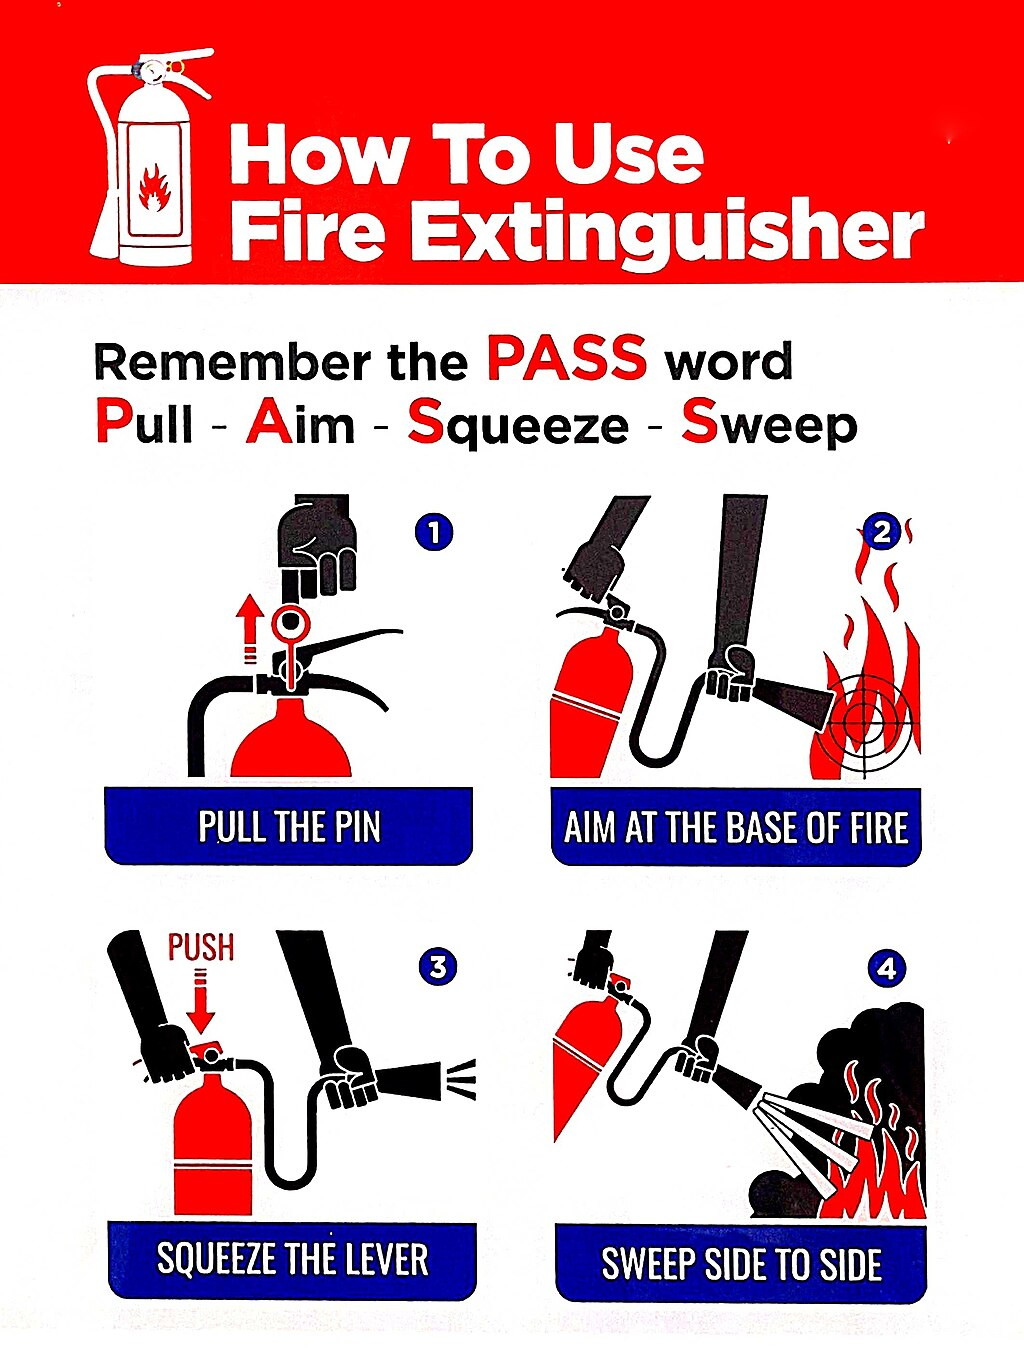 A guide of the PASS method to using a fire extinguisher. Pull, Aim, Squeeze, and Sweep.